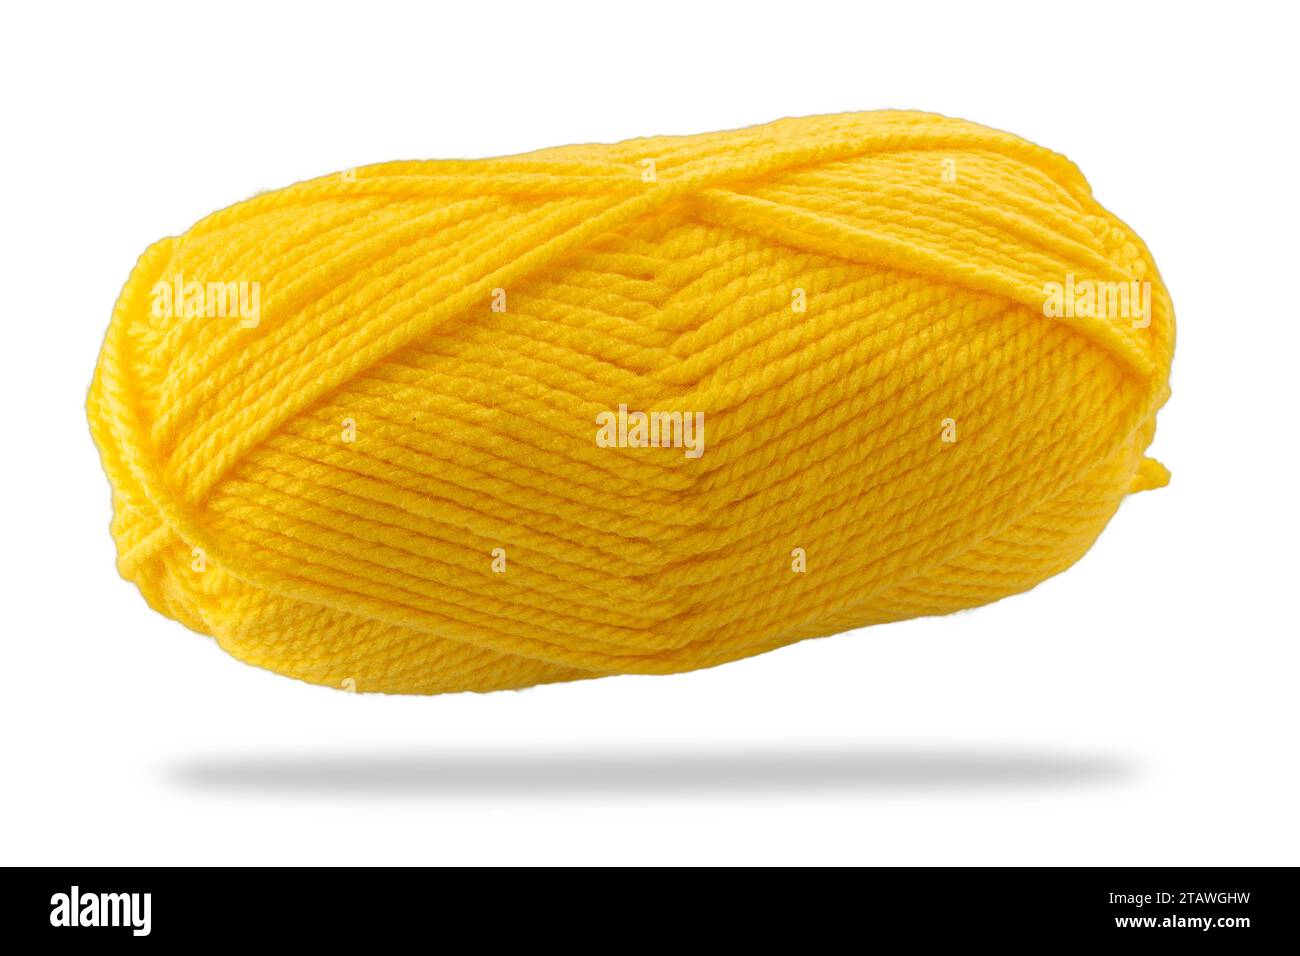 Ball of yellow-colored wool yarn isolated on white with clipping path included Stock Photo